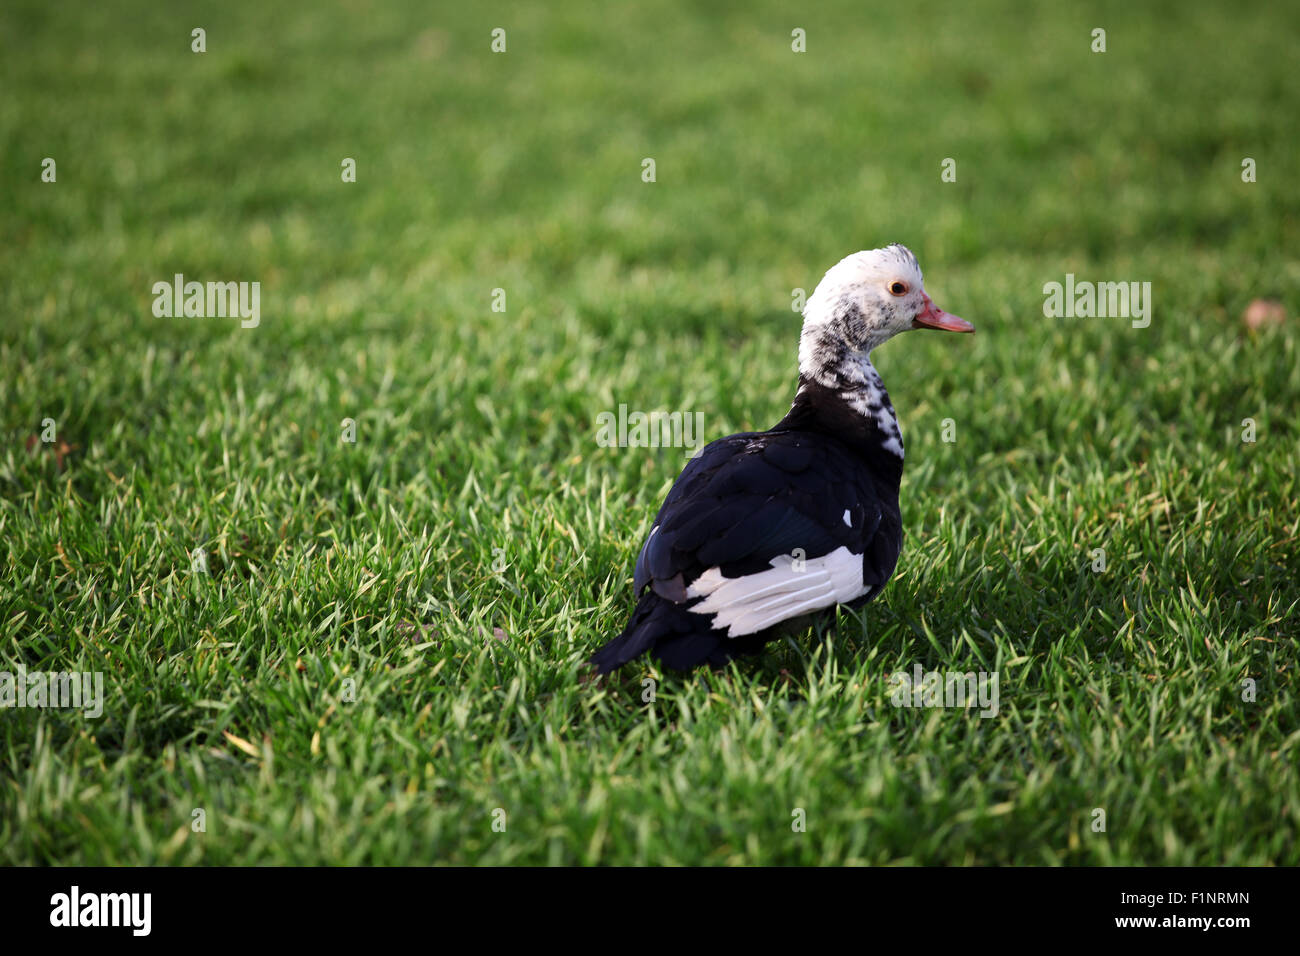 Muscovy duck in grass Stock Photo